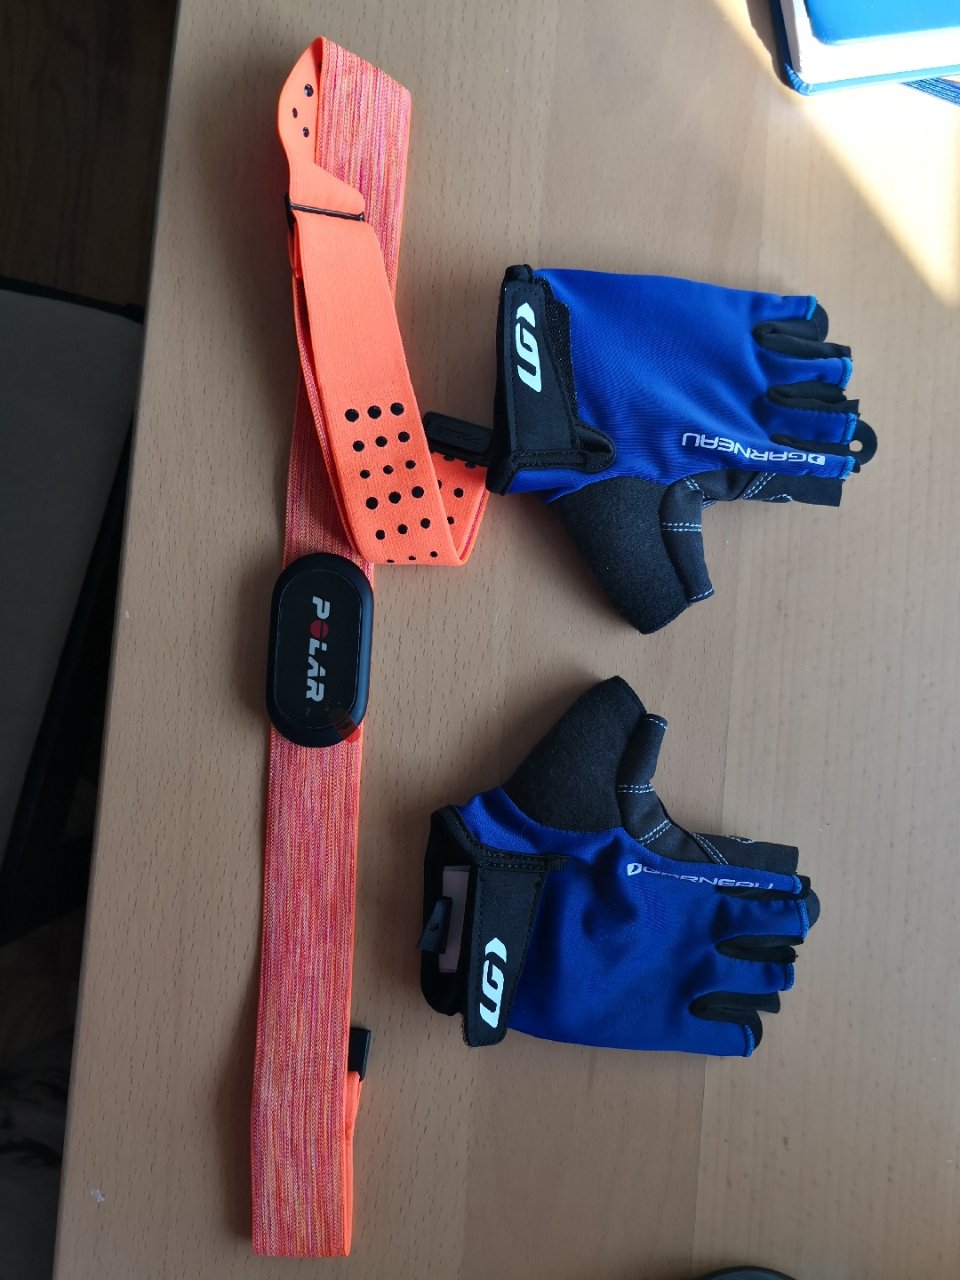 Polar H10 Heart Rate Monitor Chest Strap - ANT + Bluetooth, Waterproof HR Sensor for Men and Women (NEW) : Everything Else,Amazon.com : Louis Garneau, Women's Calory Padded, Breathable, Shock Absorbing, Half Finger Bike Gloves, Dazzling Blue, Medium : Clothing, Shoes & Jewelry